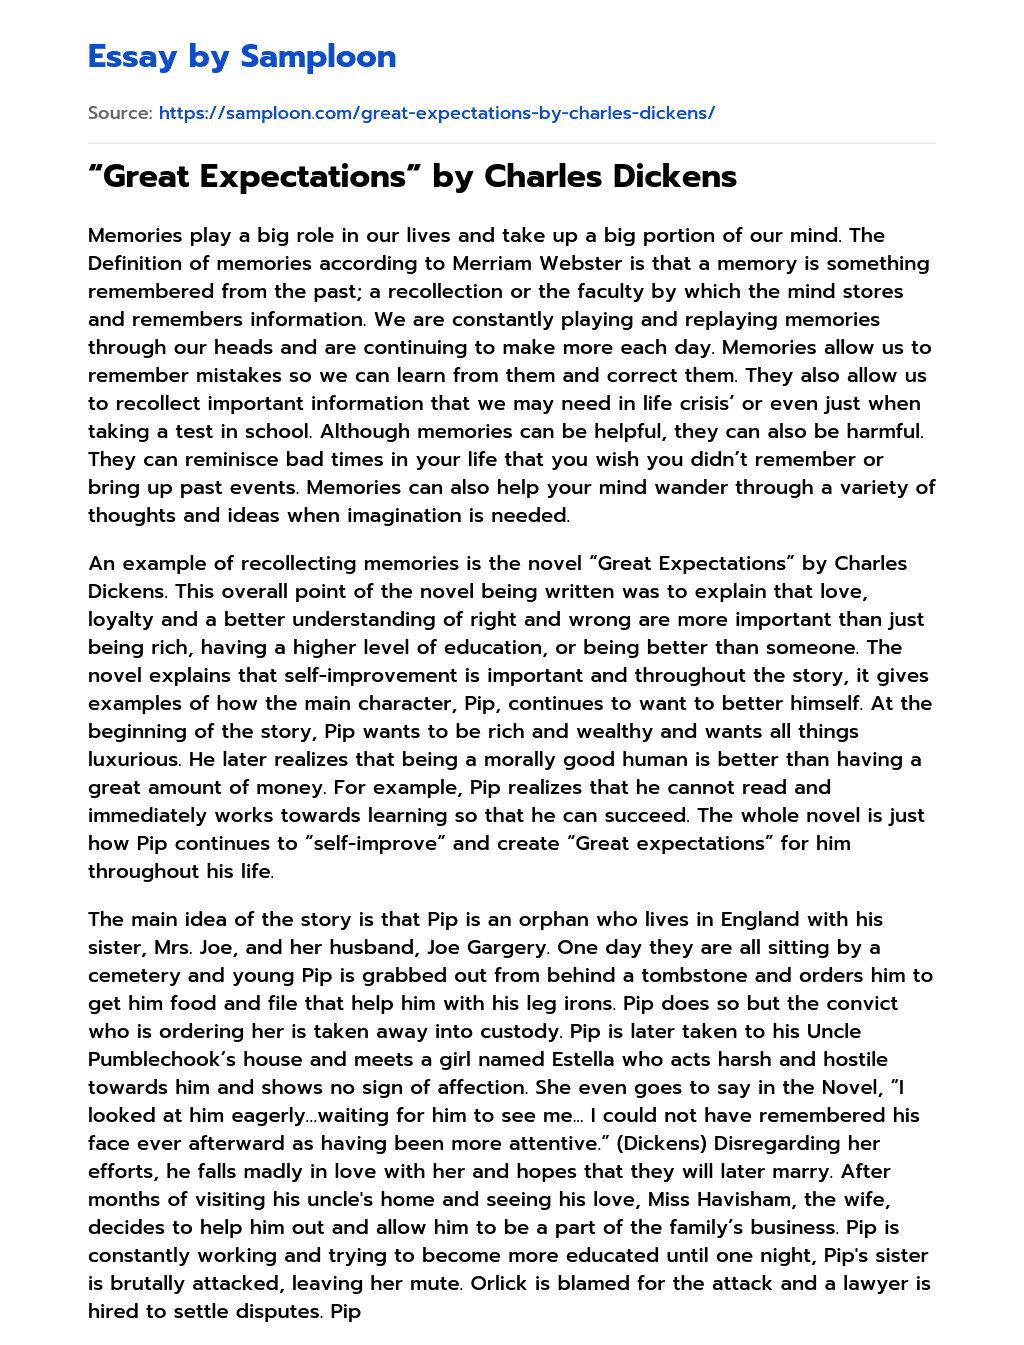 “Great Expectations” by Charles Dickens Character Analysis essay